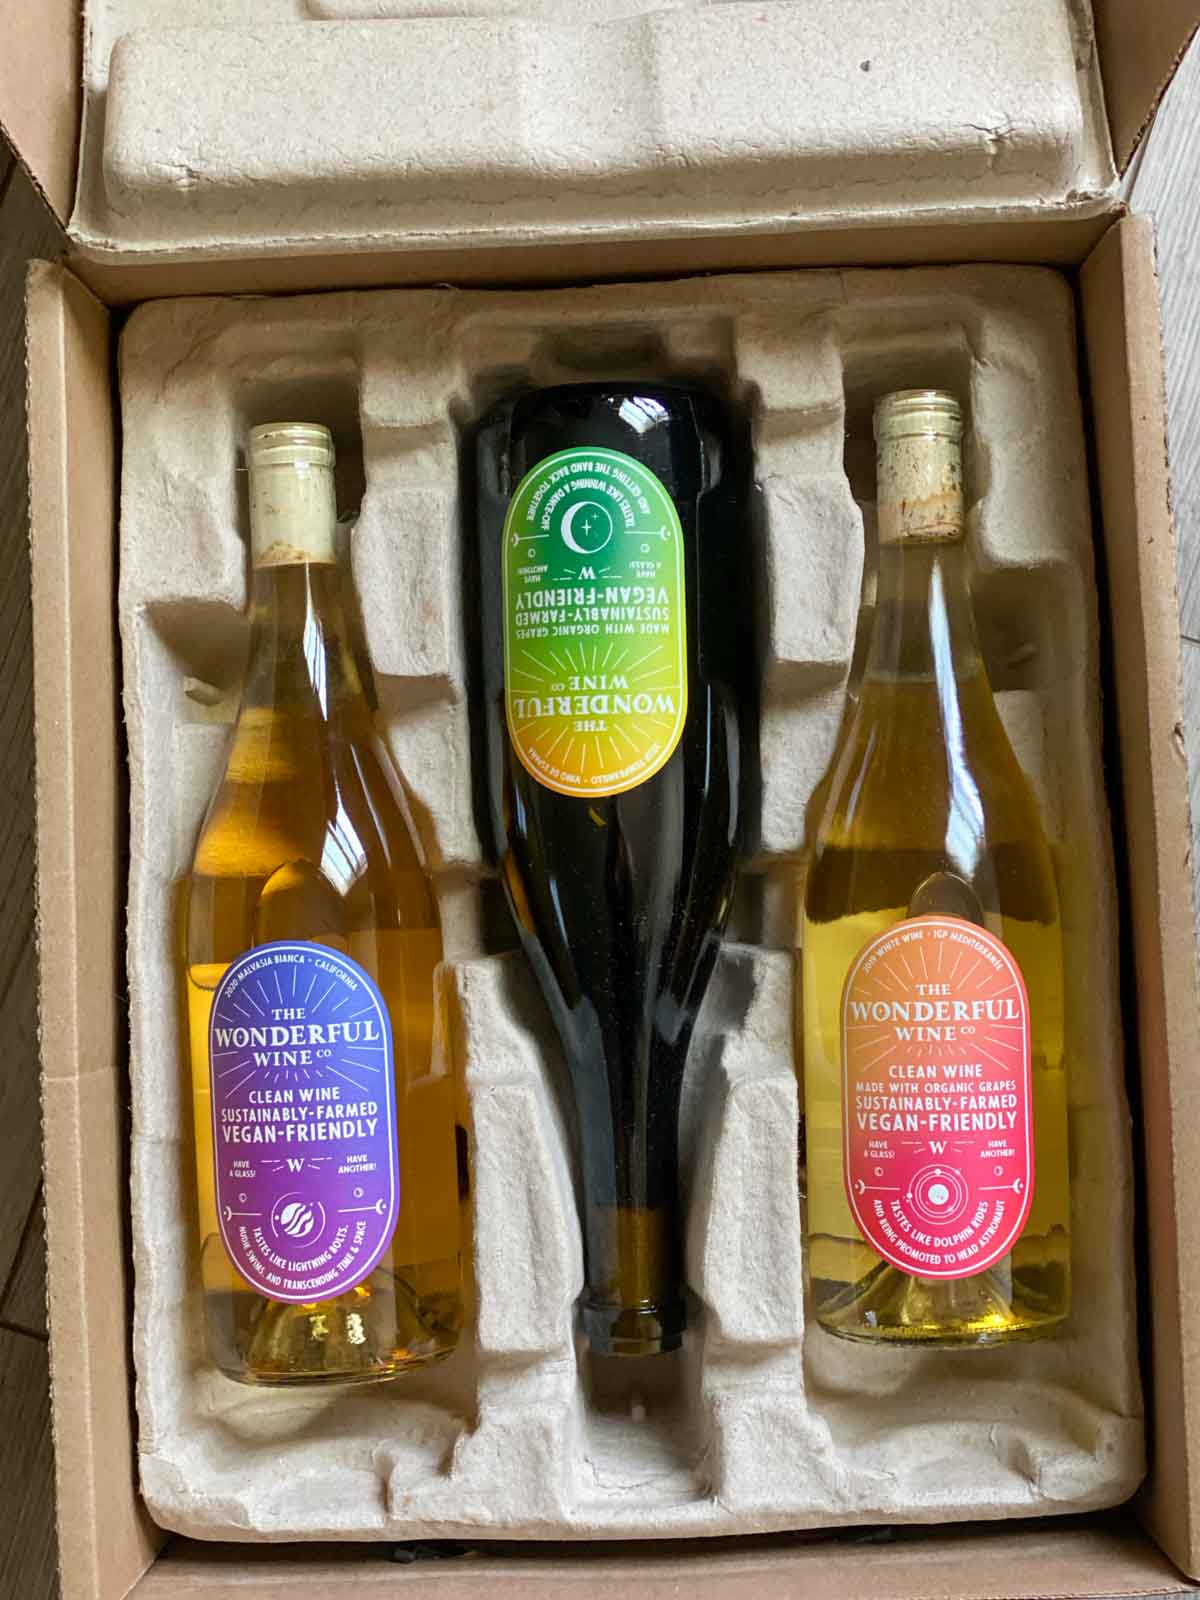 3 bottles of wonderful wine co in packaging - red, white, and orange